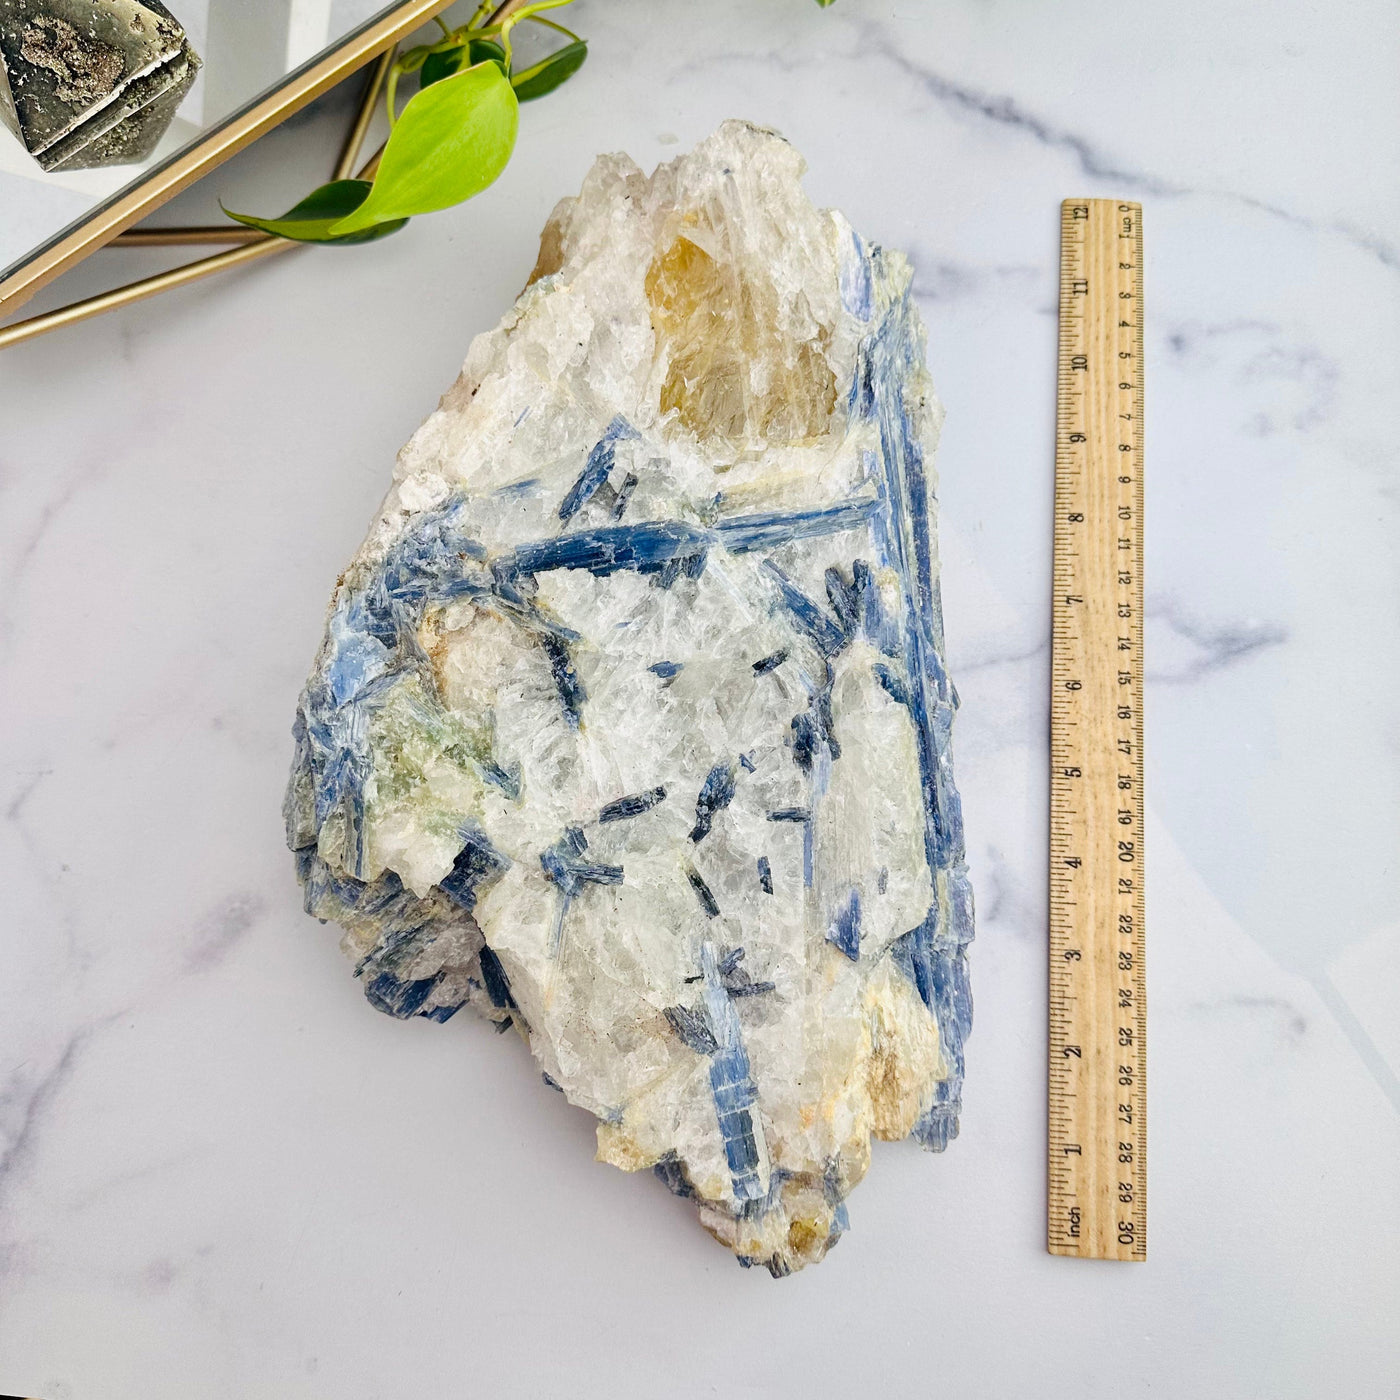 Blue Kyanite Rough Formation With Ruler For Size Reference 